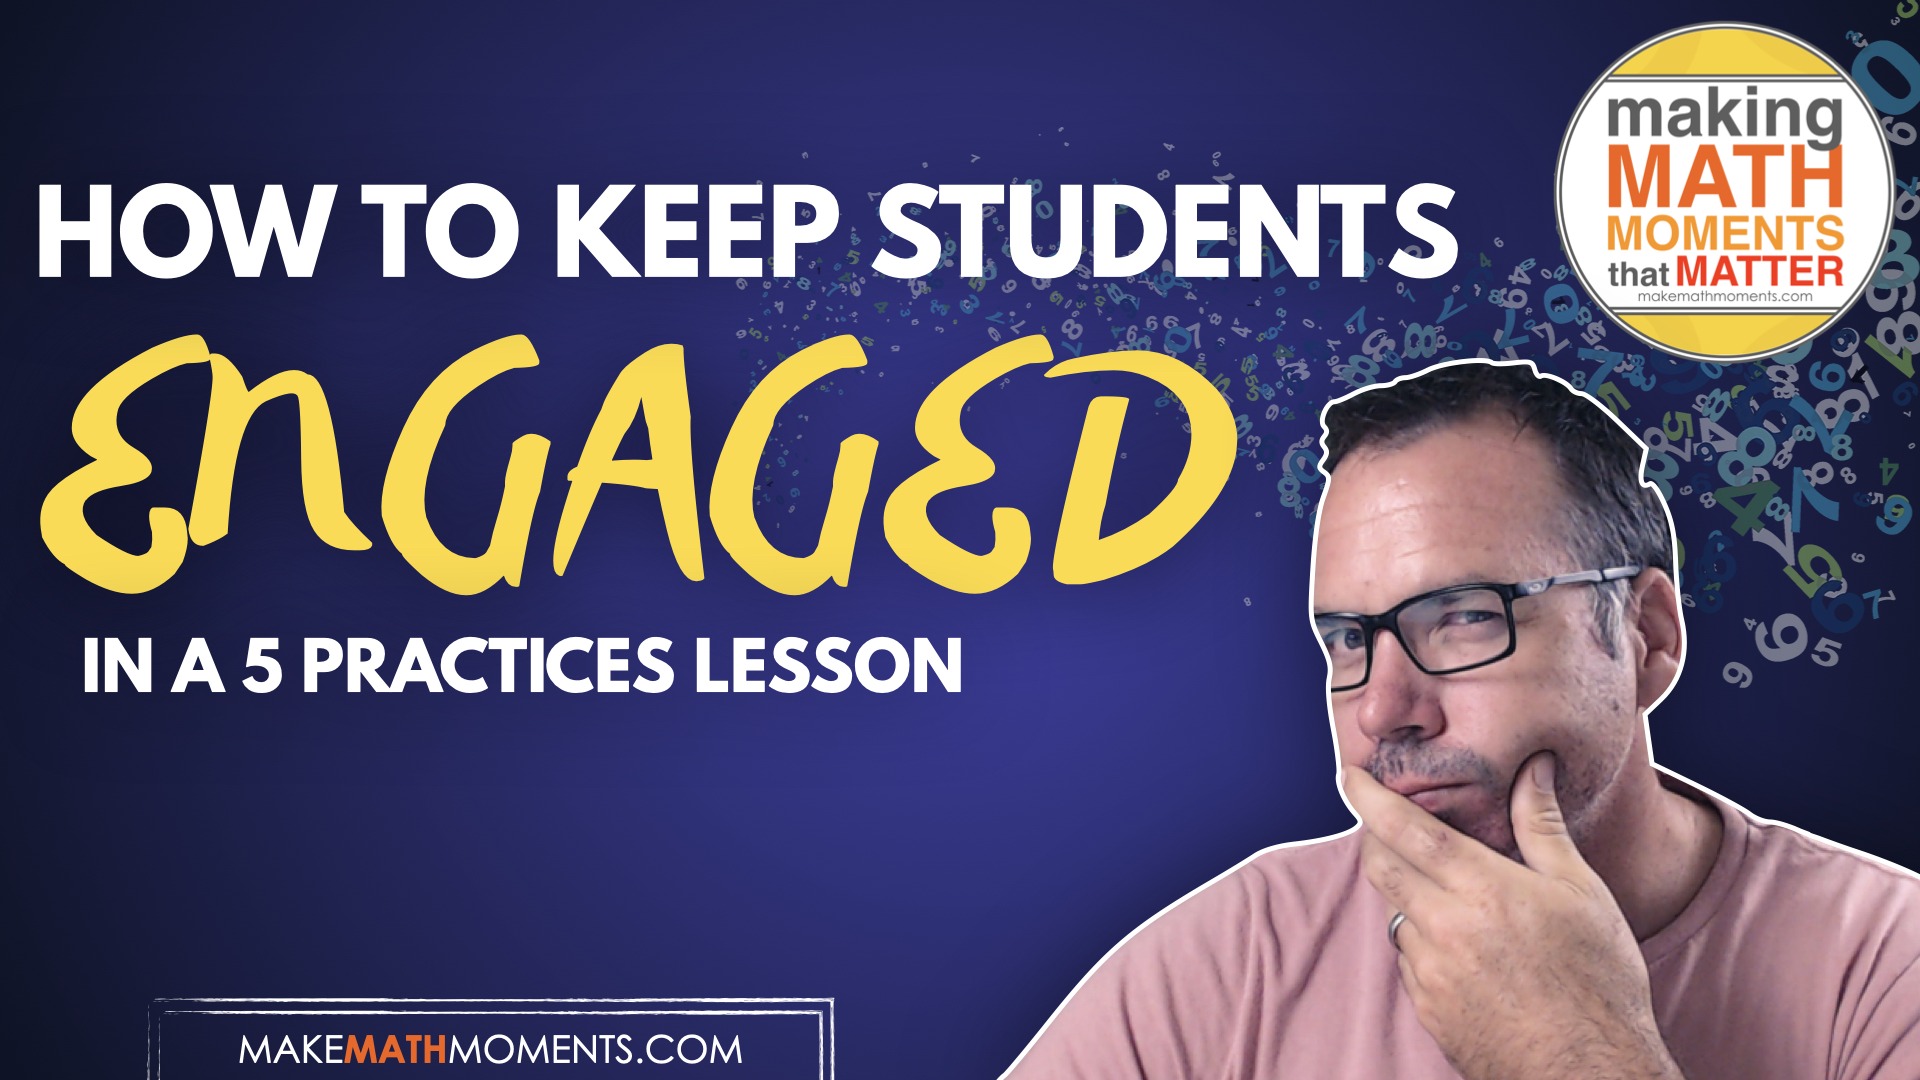 How To Keep Students Engaged in a Full 5 Practices Lesson